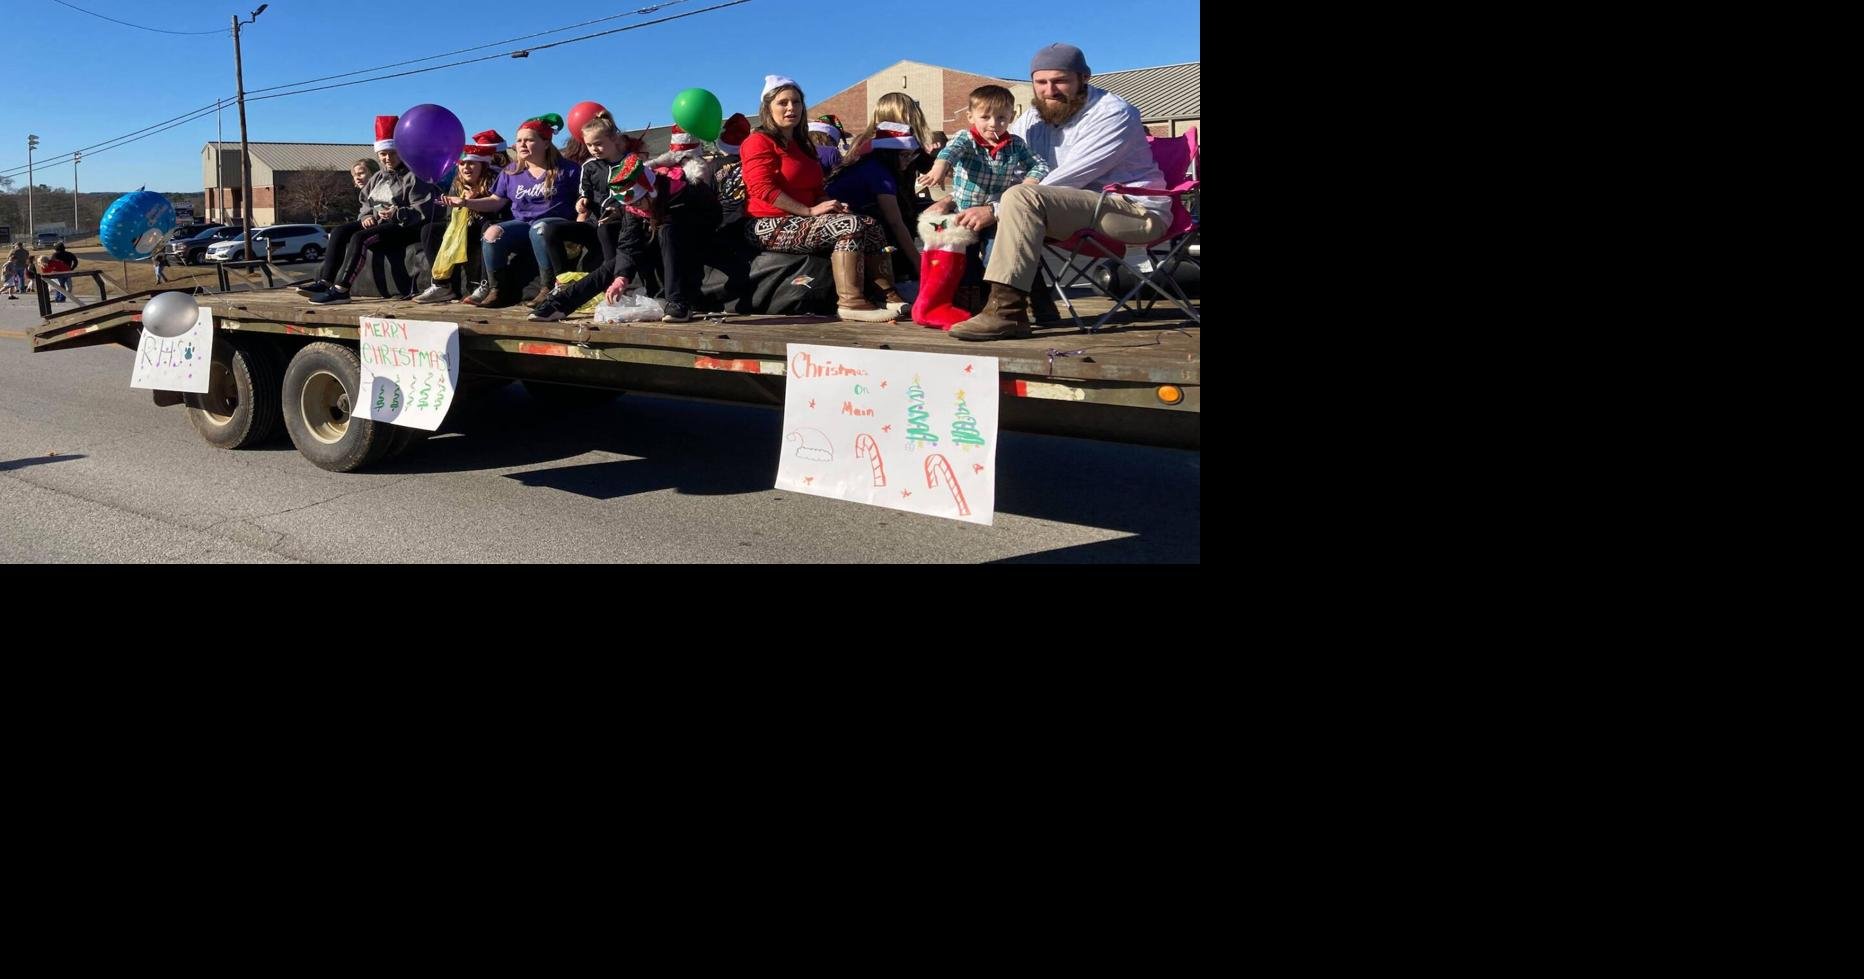 Ranburne Christmas Parade takes over Main Street Cleburne County